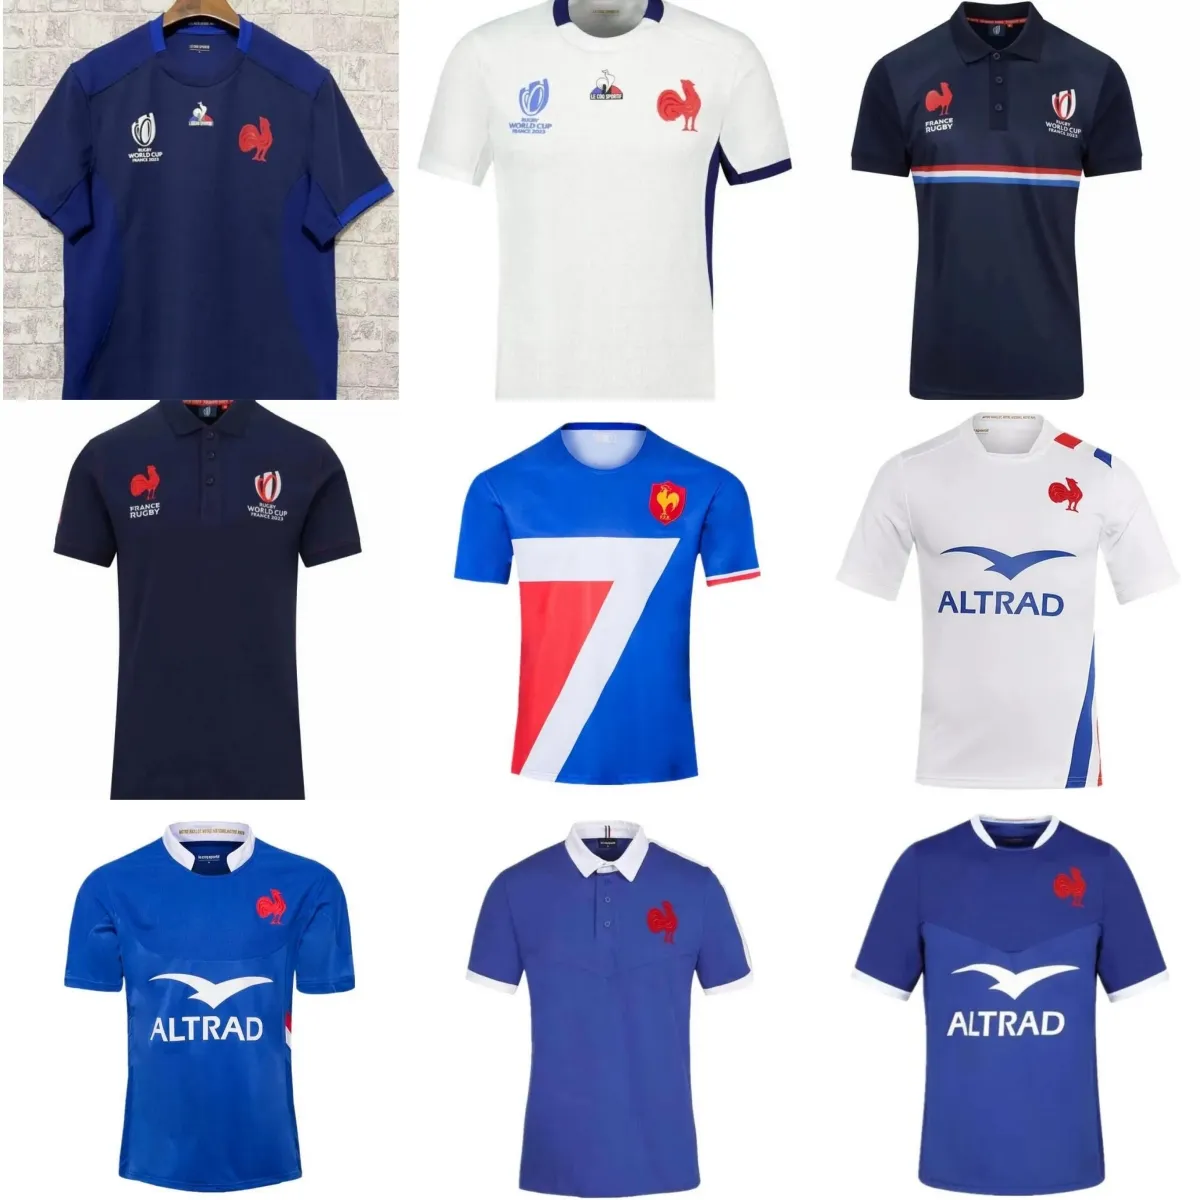 style 21 22 23 24 France Super Rugby Jerseys 2023 2024 Maillot de Foot BOLN chemise taille S-5XL Top Qualité